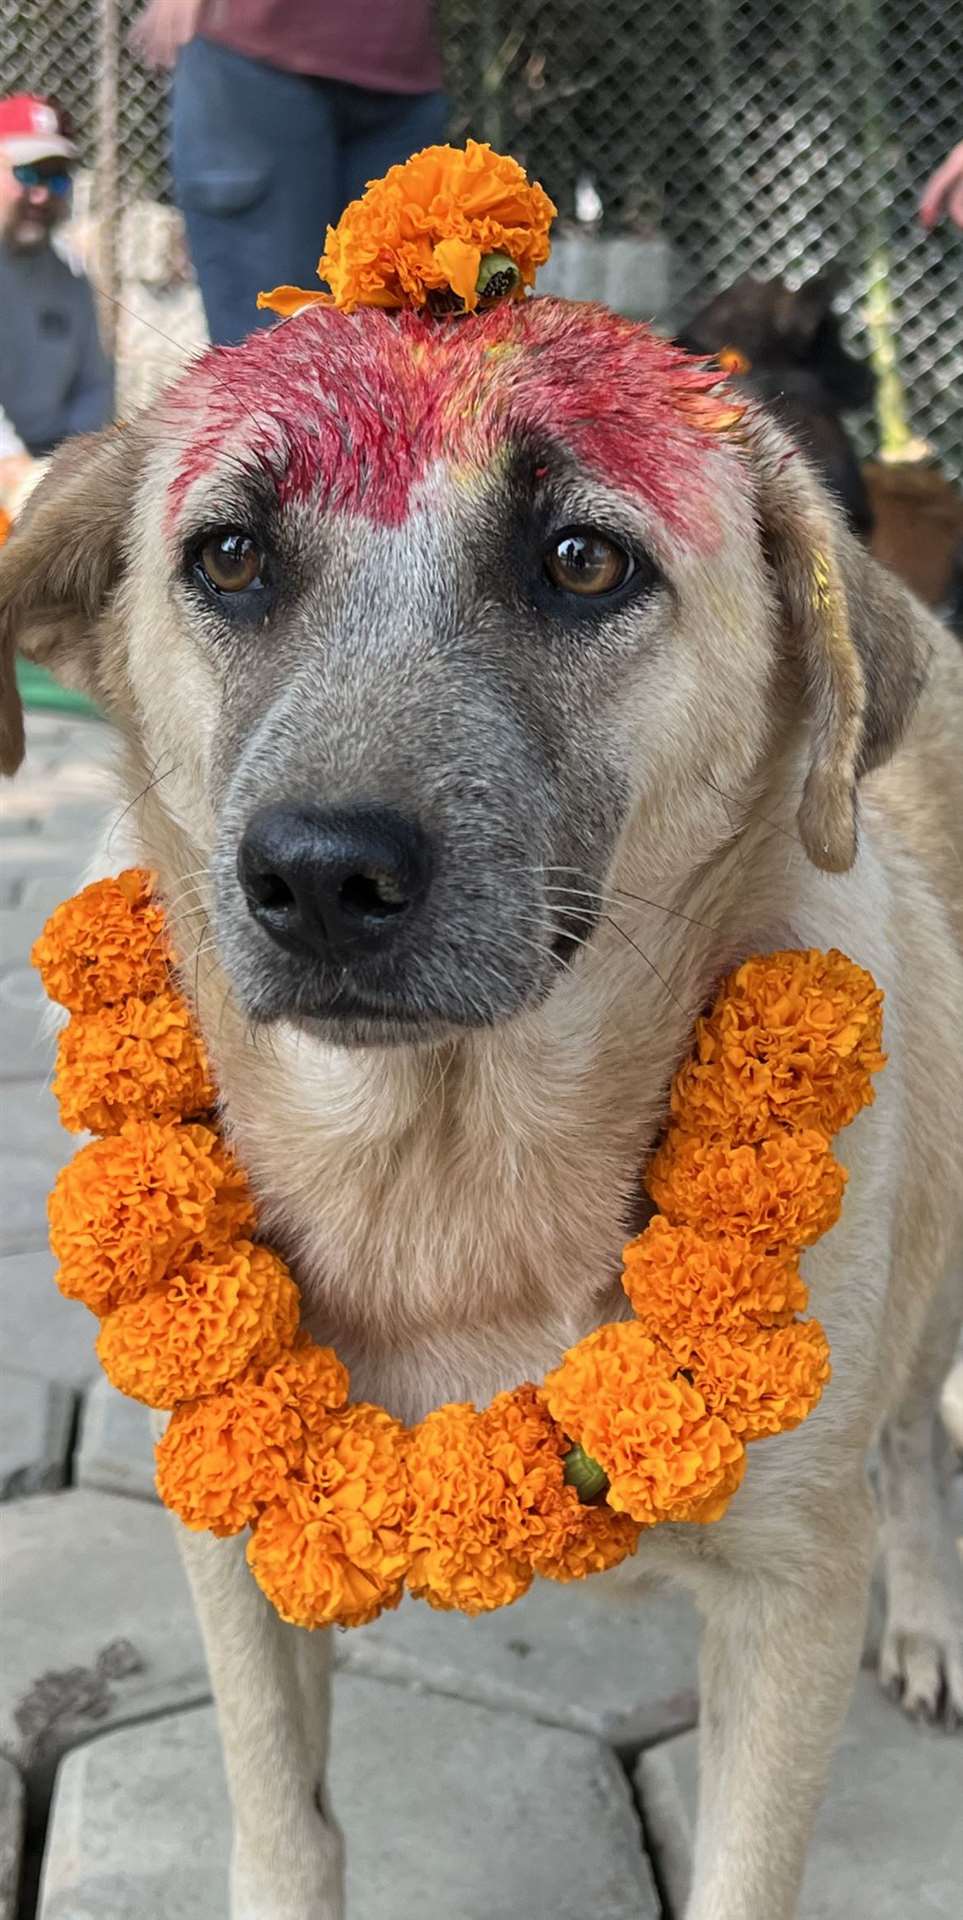 The shelter celebrated the Day of the Dogs Festival ‘Kukur Tihar’ by painting a streak of vermilion on the dogs’ foreheads and putting garlands of flowers round their necks.